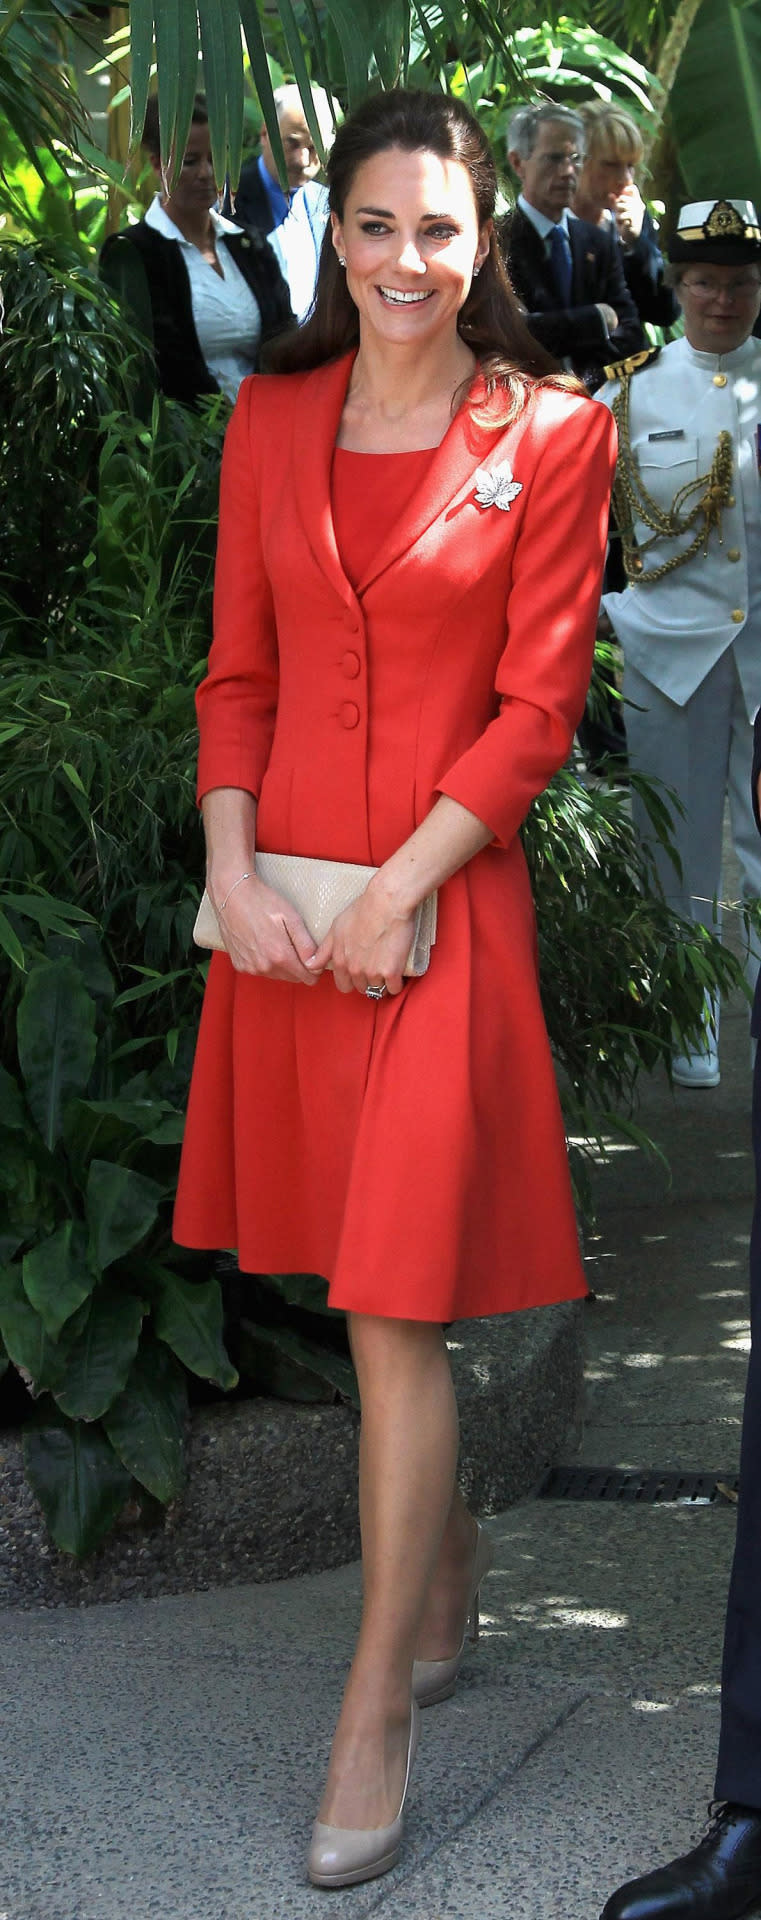 <p>Kate said goodbye to Canada in a red Catherine Walker ensemble paired with L.K. Bennett heels and clutch.</p><p><i>[Photo: PA]</i></p>